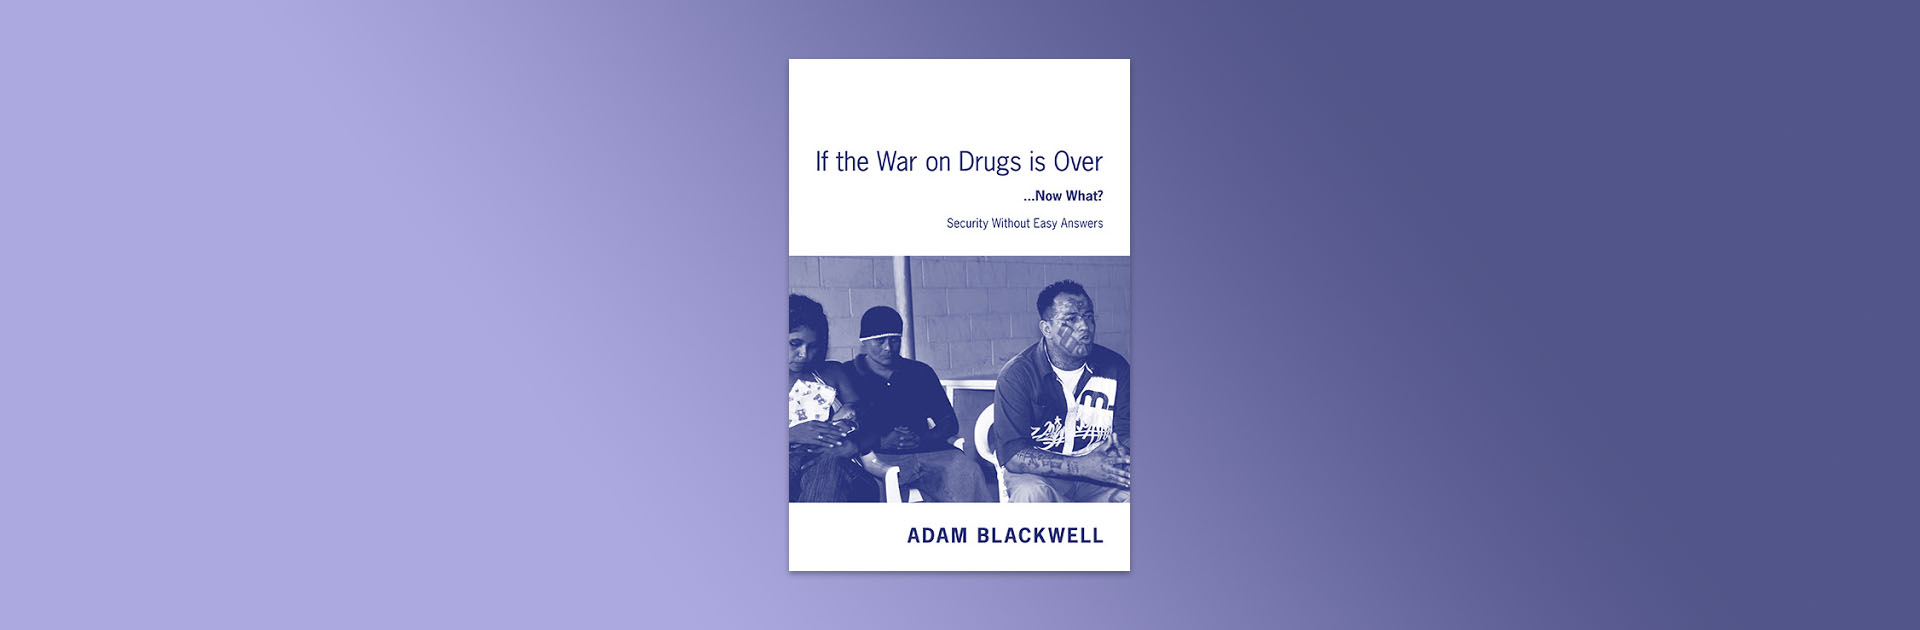 If the War on Drugs is Over - Now What?